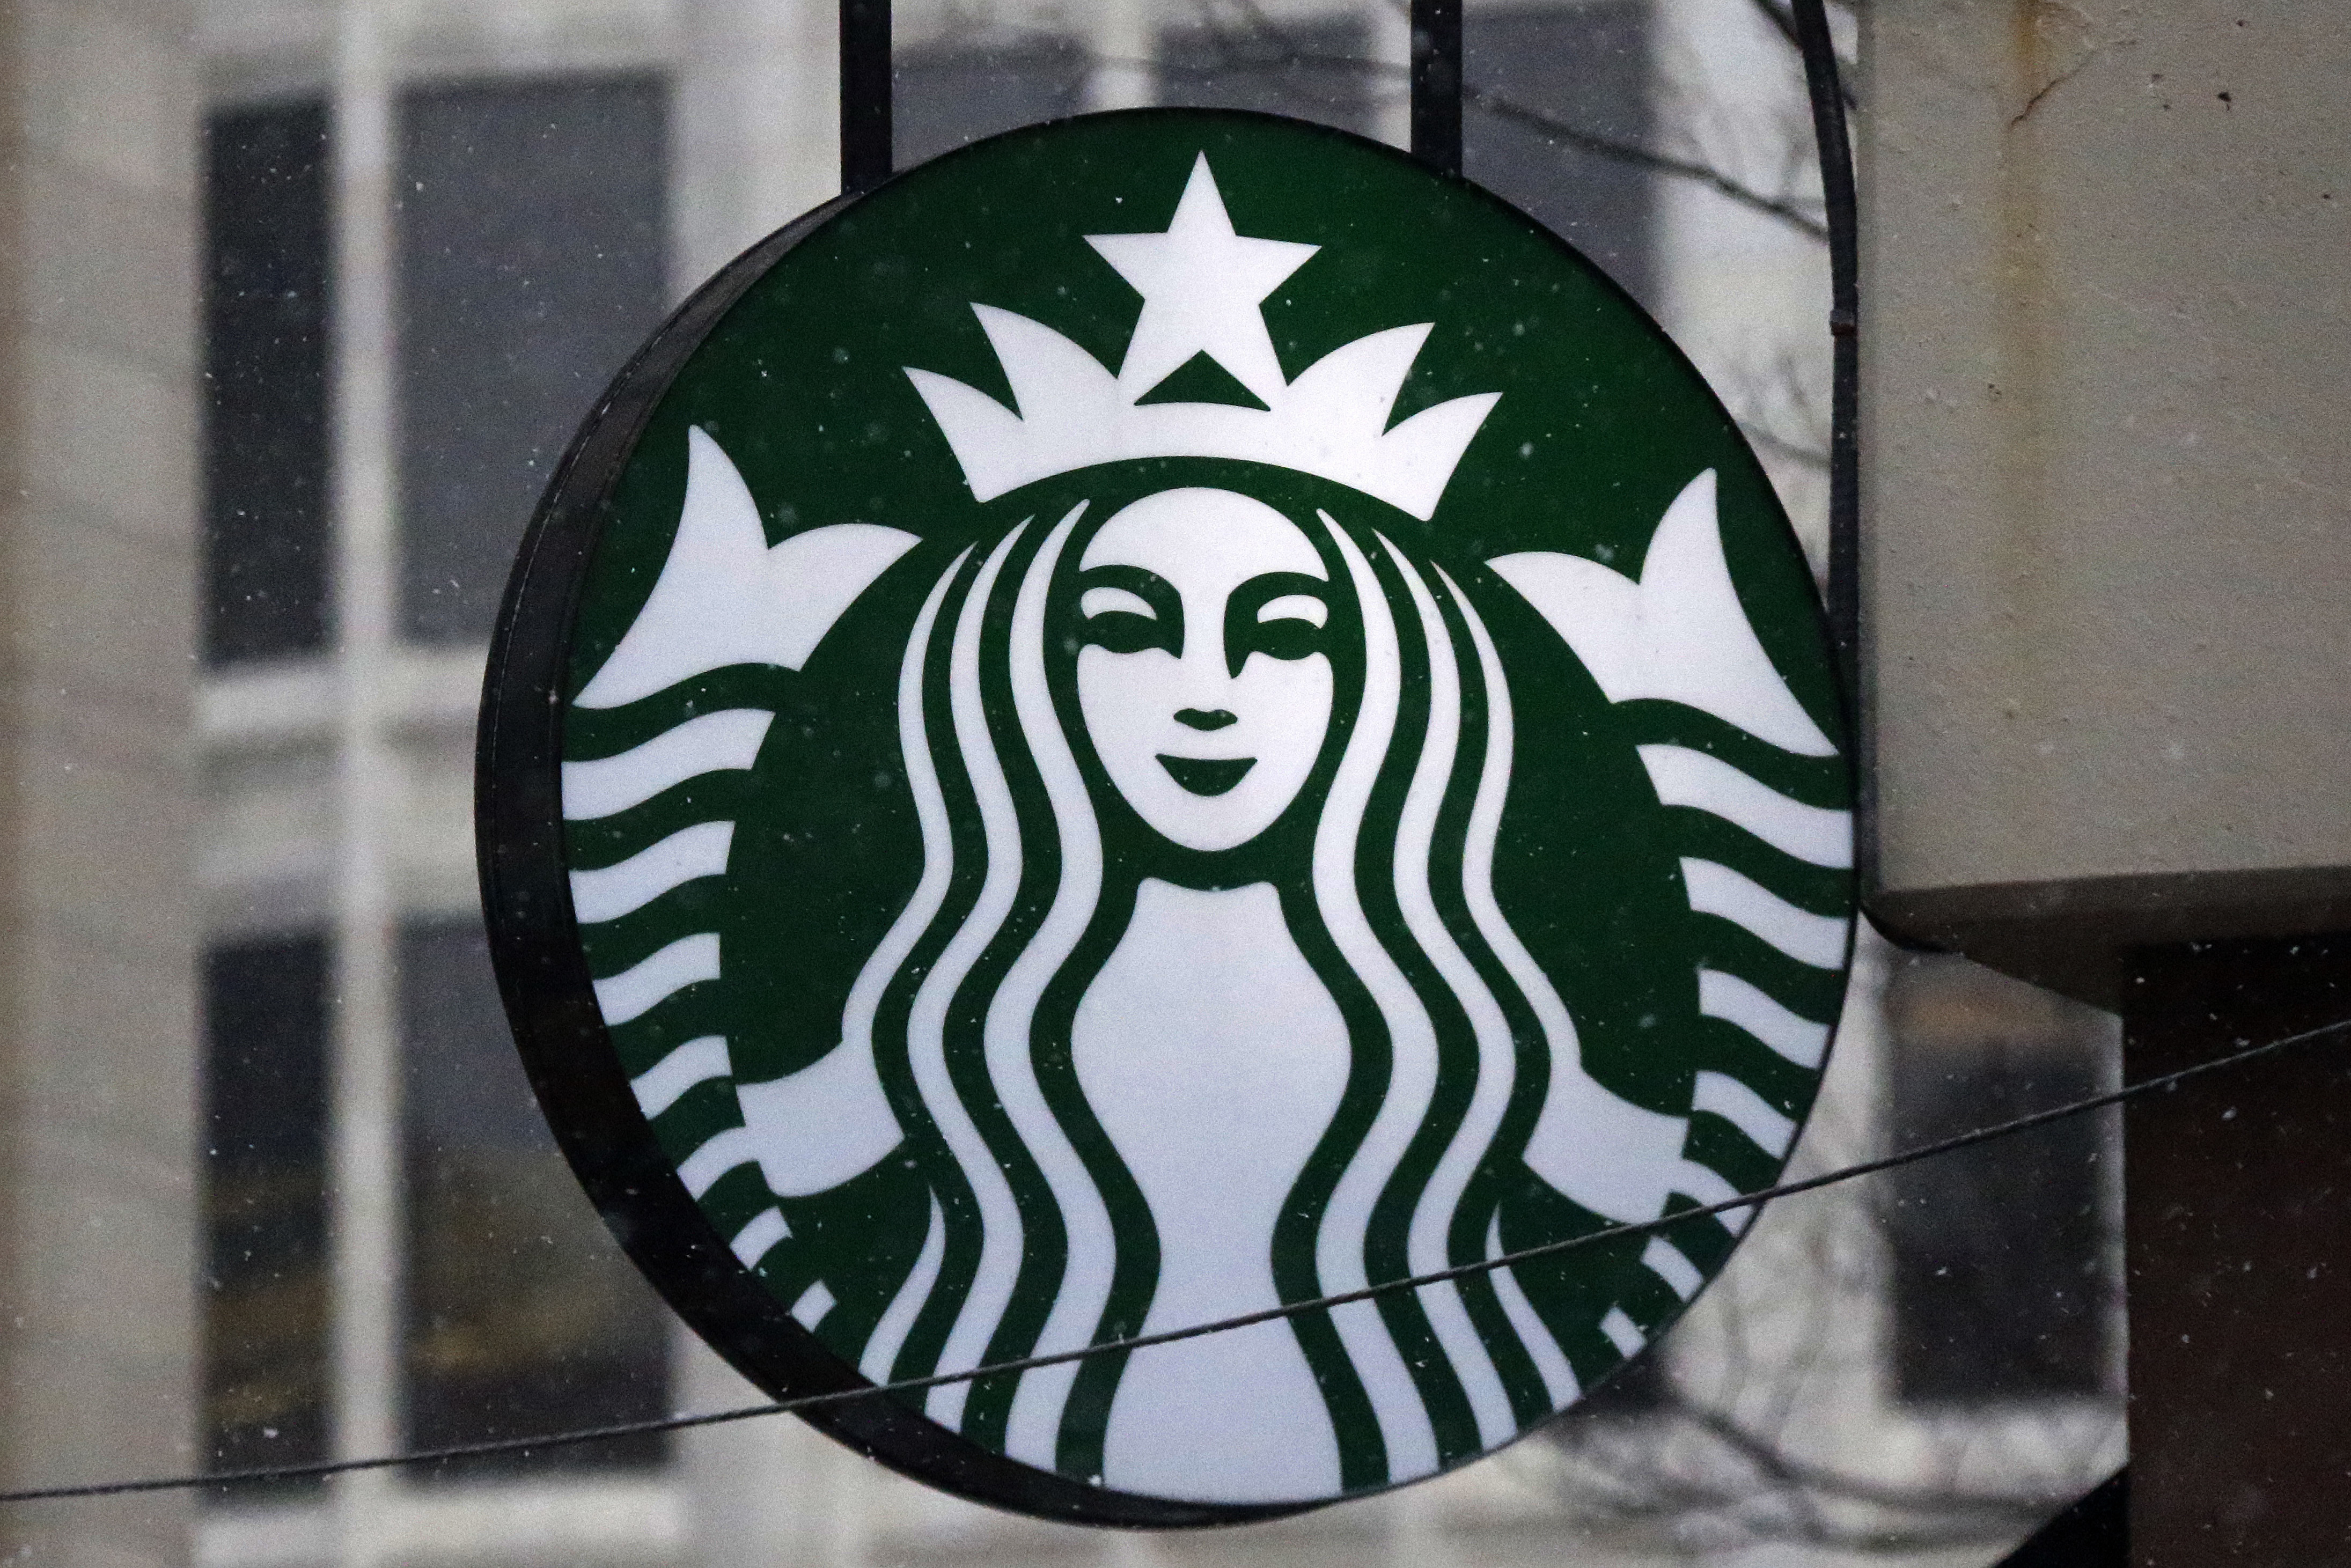 FILE - The Starbucks logo is seen, March 14, 2017, on a shop in downtown Pittsburgh. Business closings on Christmas Eve are less common than those on Christmas Day, but many large chains still cut back hours or close up shop early for the coming holiday. Many Starbucks locations will be open on Christmas Eve, Sunday, Dec. 24, 2023, but hours can vary. (AP Photo/Gene J. Puskar, File)